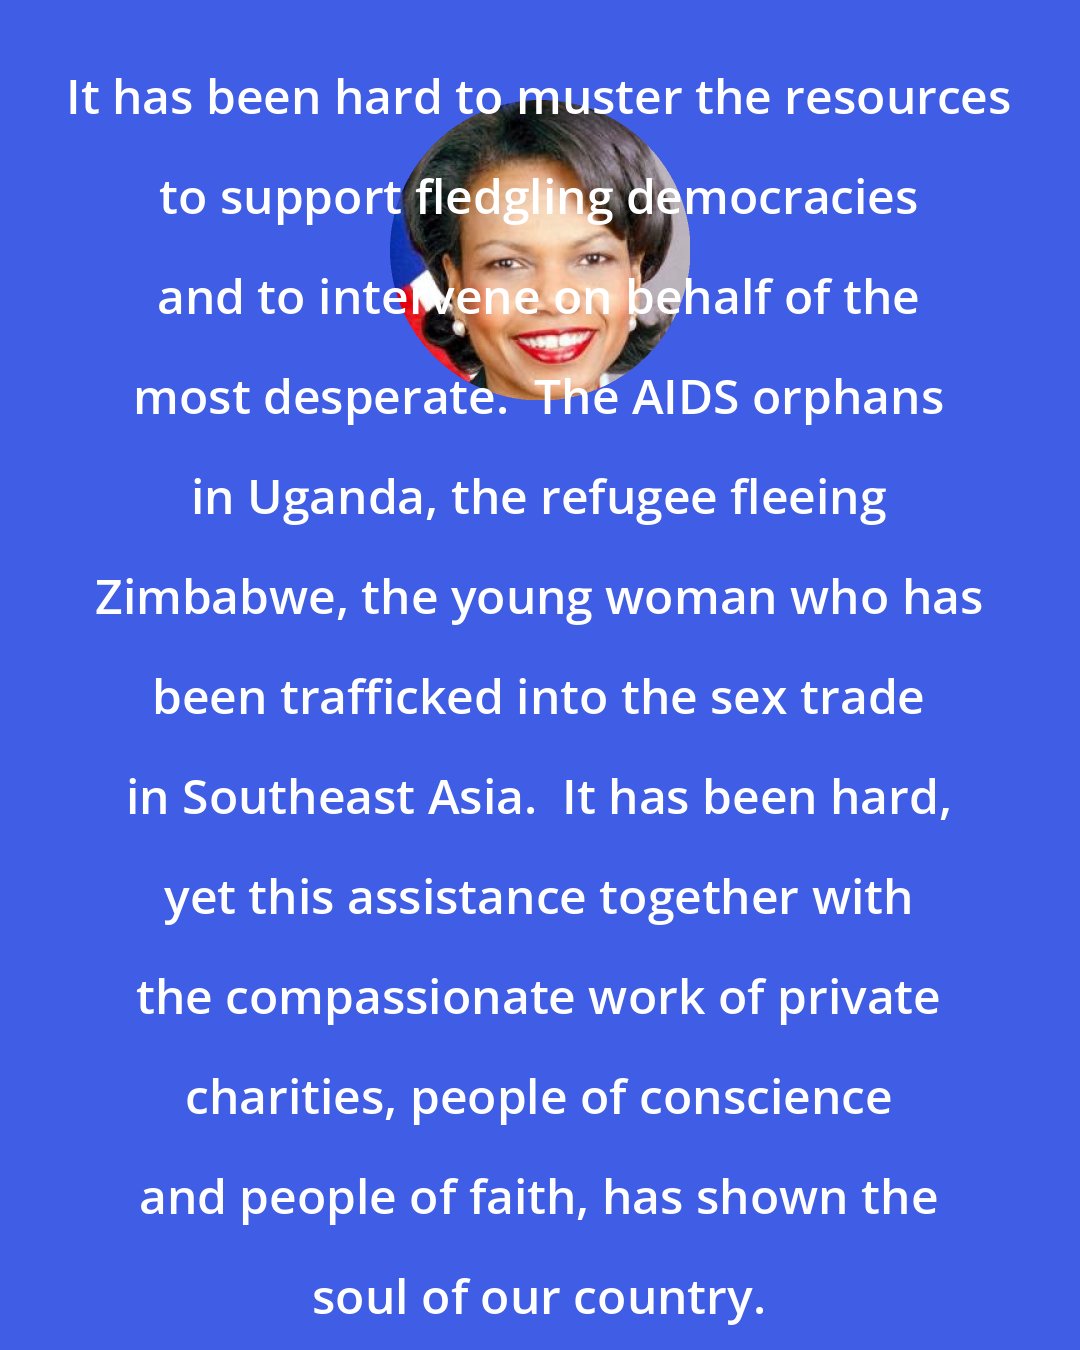 Condoleezza Rice: It has been hard to muster the resources to support fledgling democracies and to intervene on behalf of the most desperate.  The AIDS orphans in Uganda, the refugee fleeing Zimbabwe, the young woman who has been trafficked into the sex trade in Southeast Asia.  It has been hard, yet this assistance together with the compassionate work of private charities, people of conscience and people of faith, has shown the soul of our country.